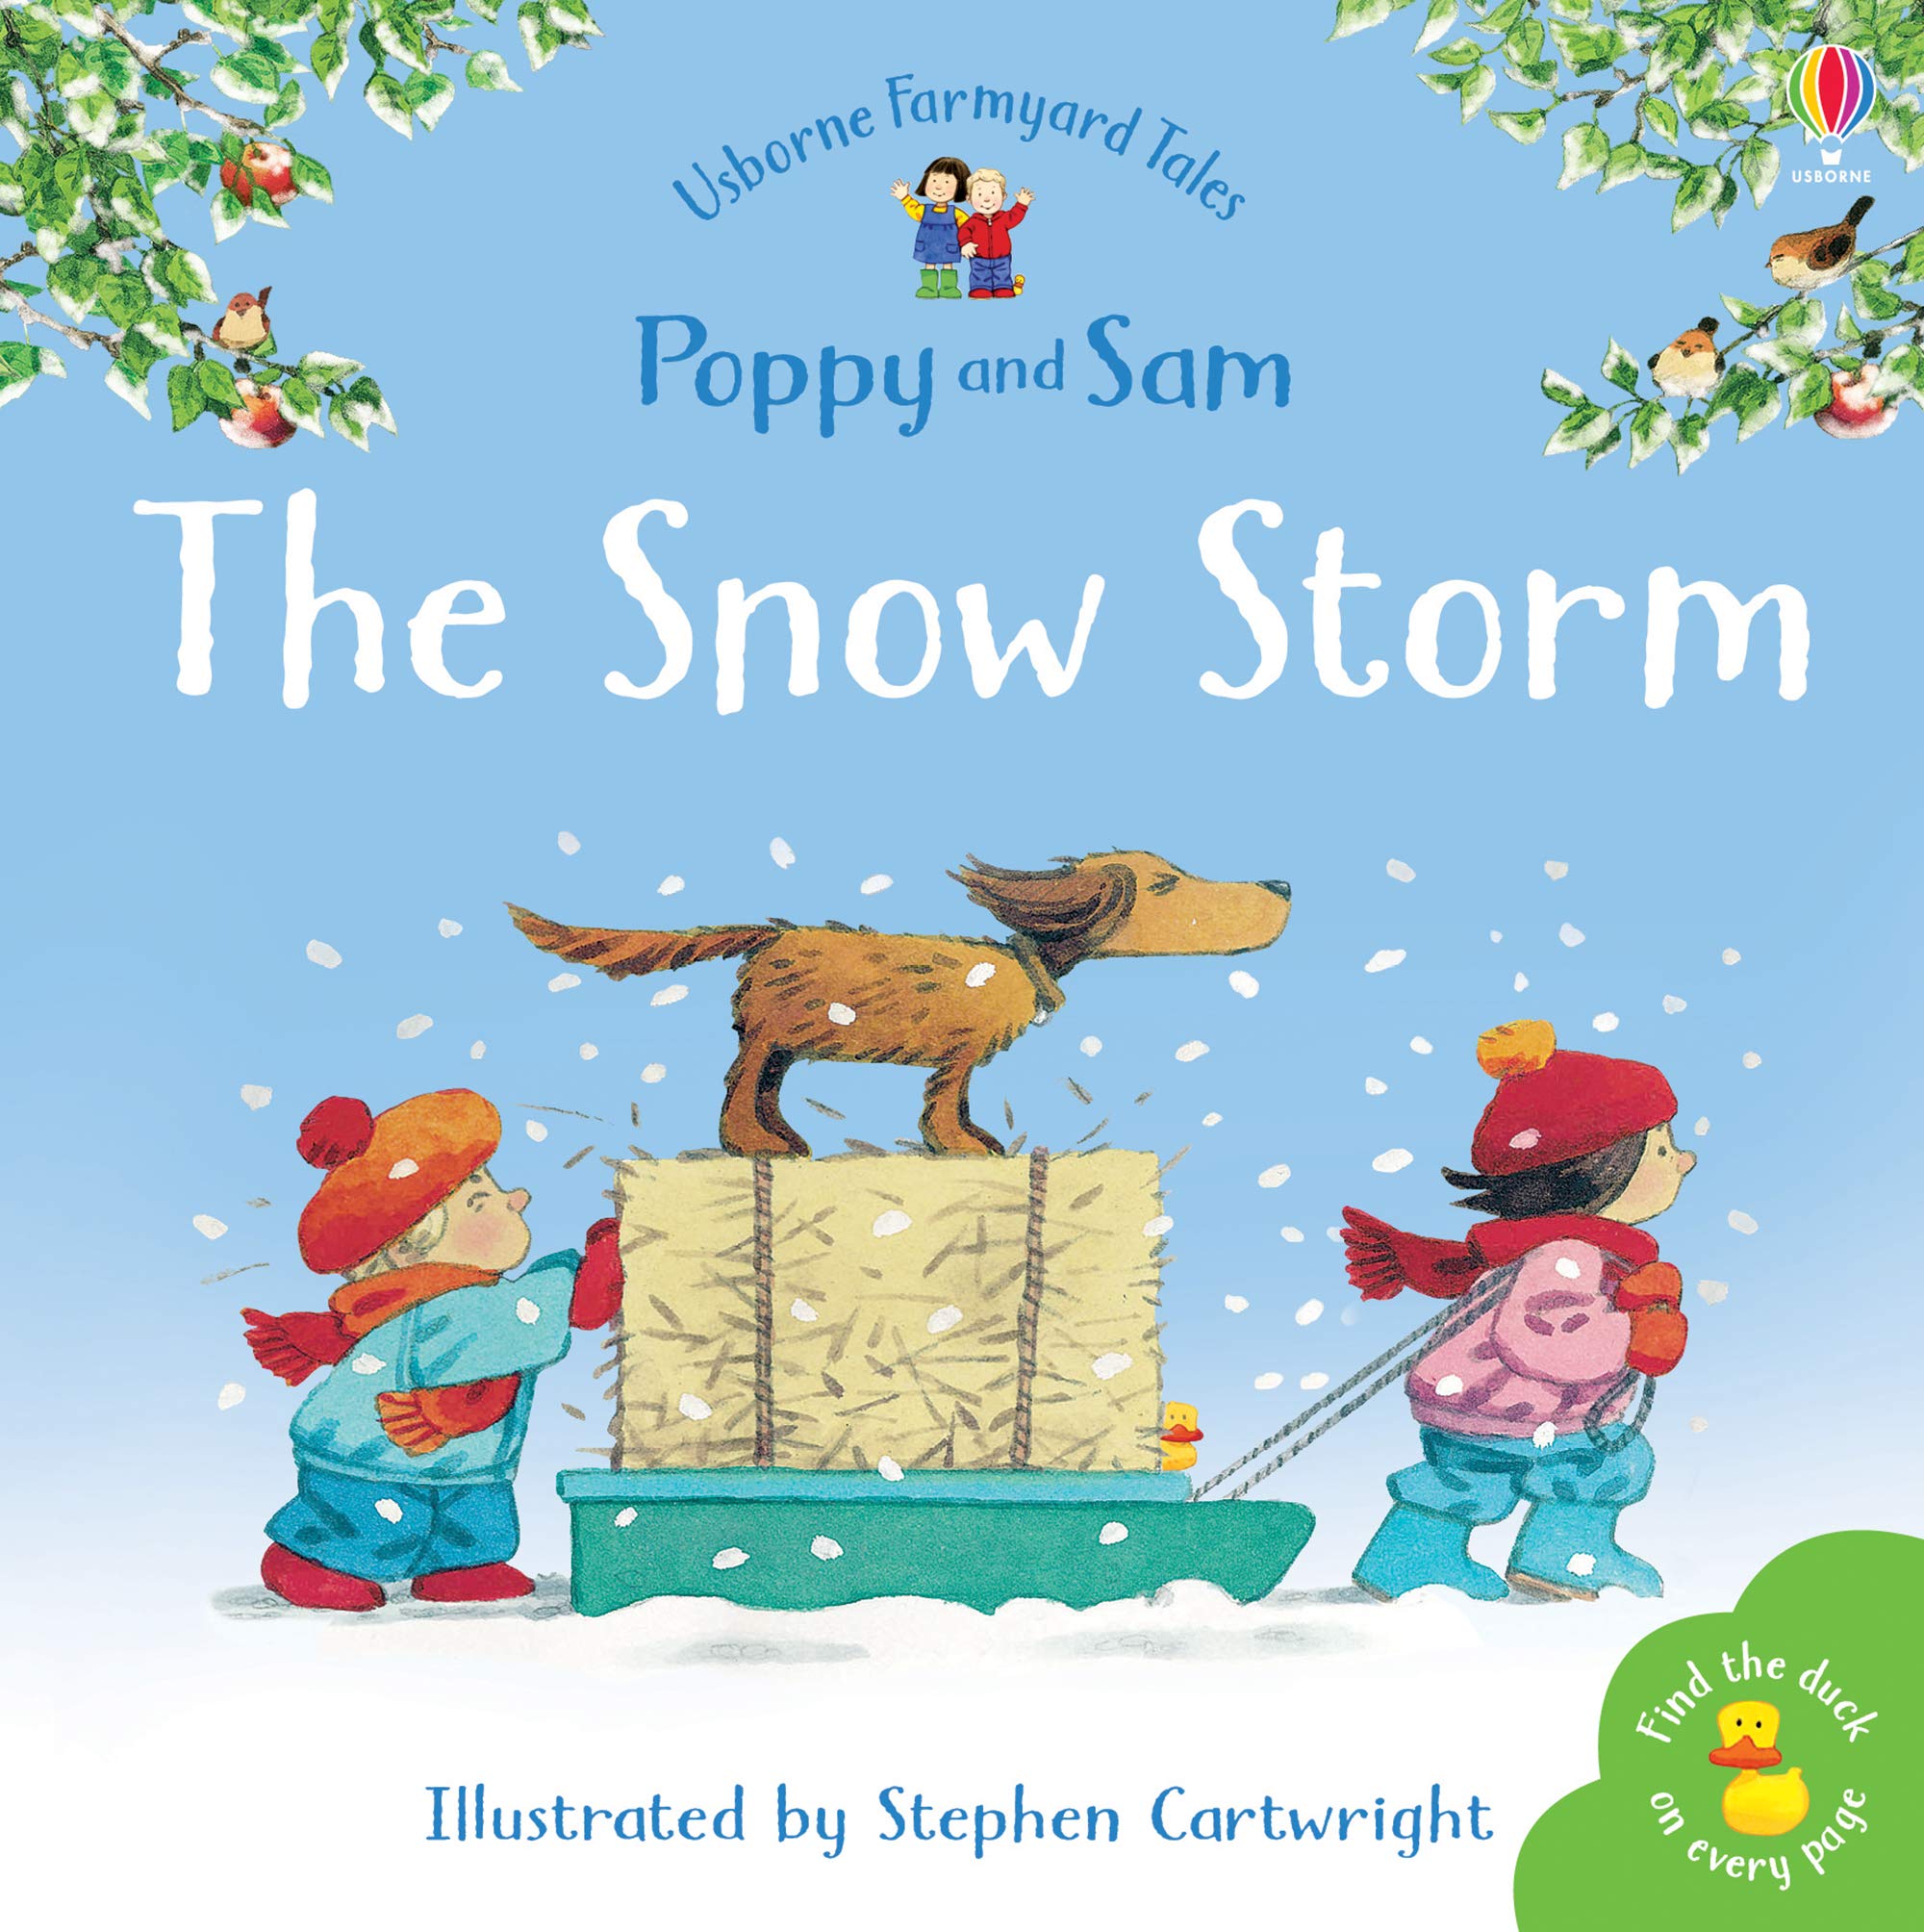 The Snow Storm - Heather Amery and Stephen Cartwright